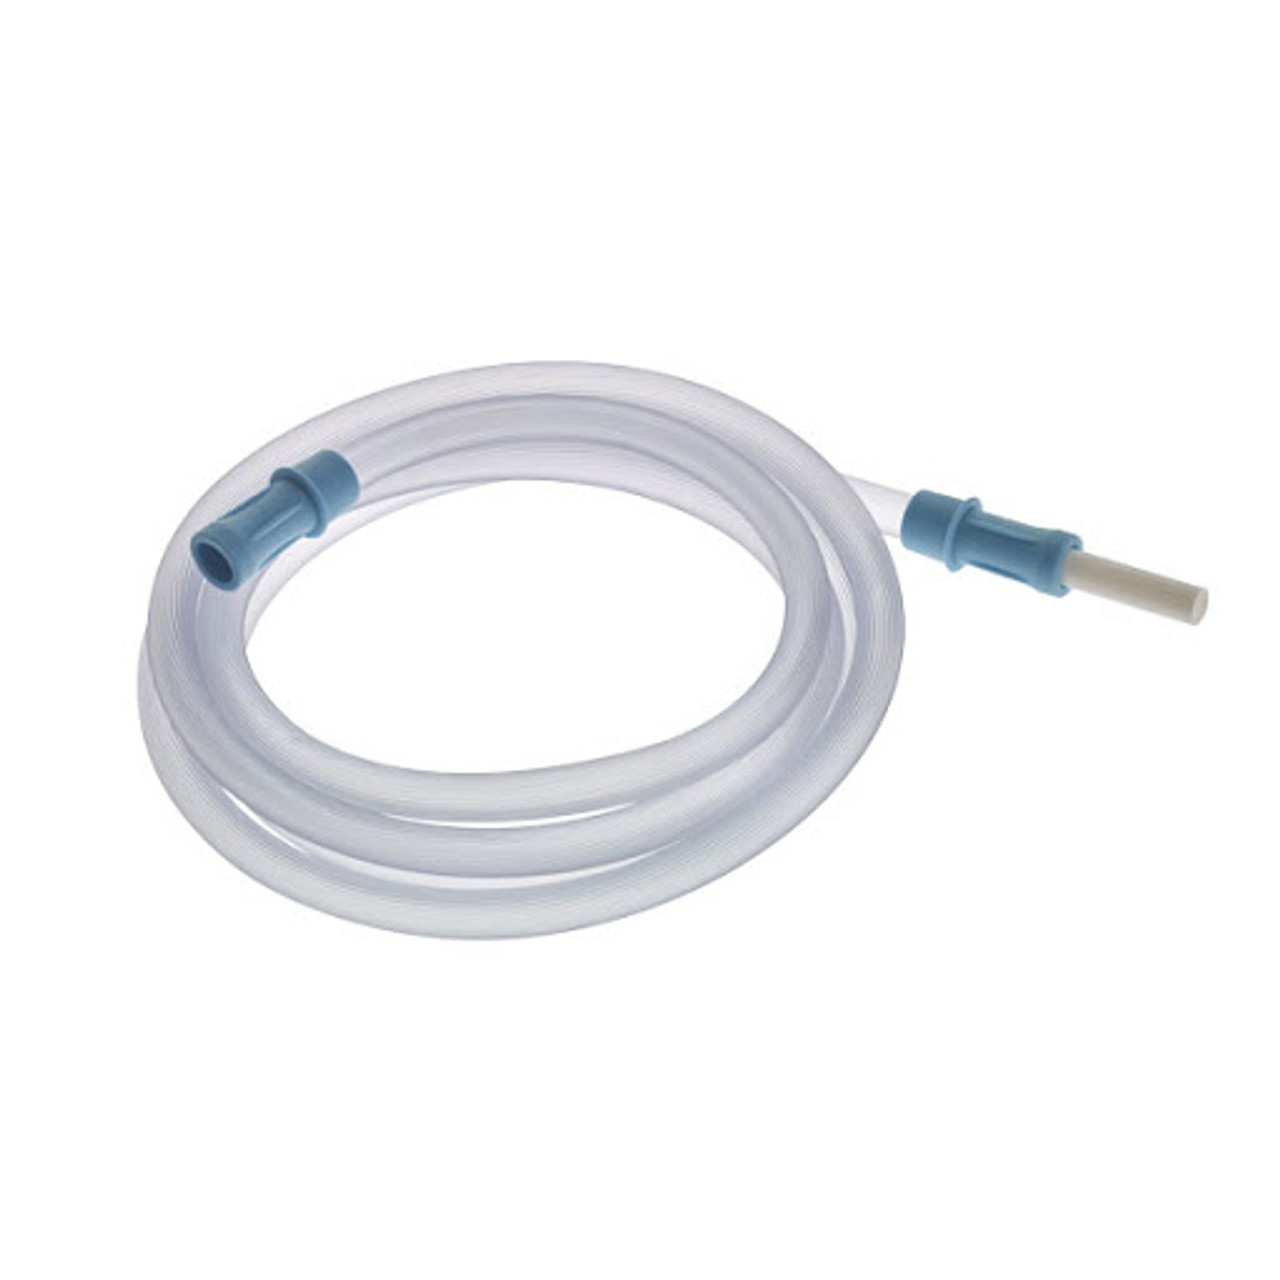 Medi-Vac® Suction Tubing With Connector 9/32" x 6'